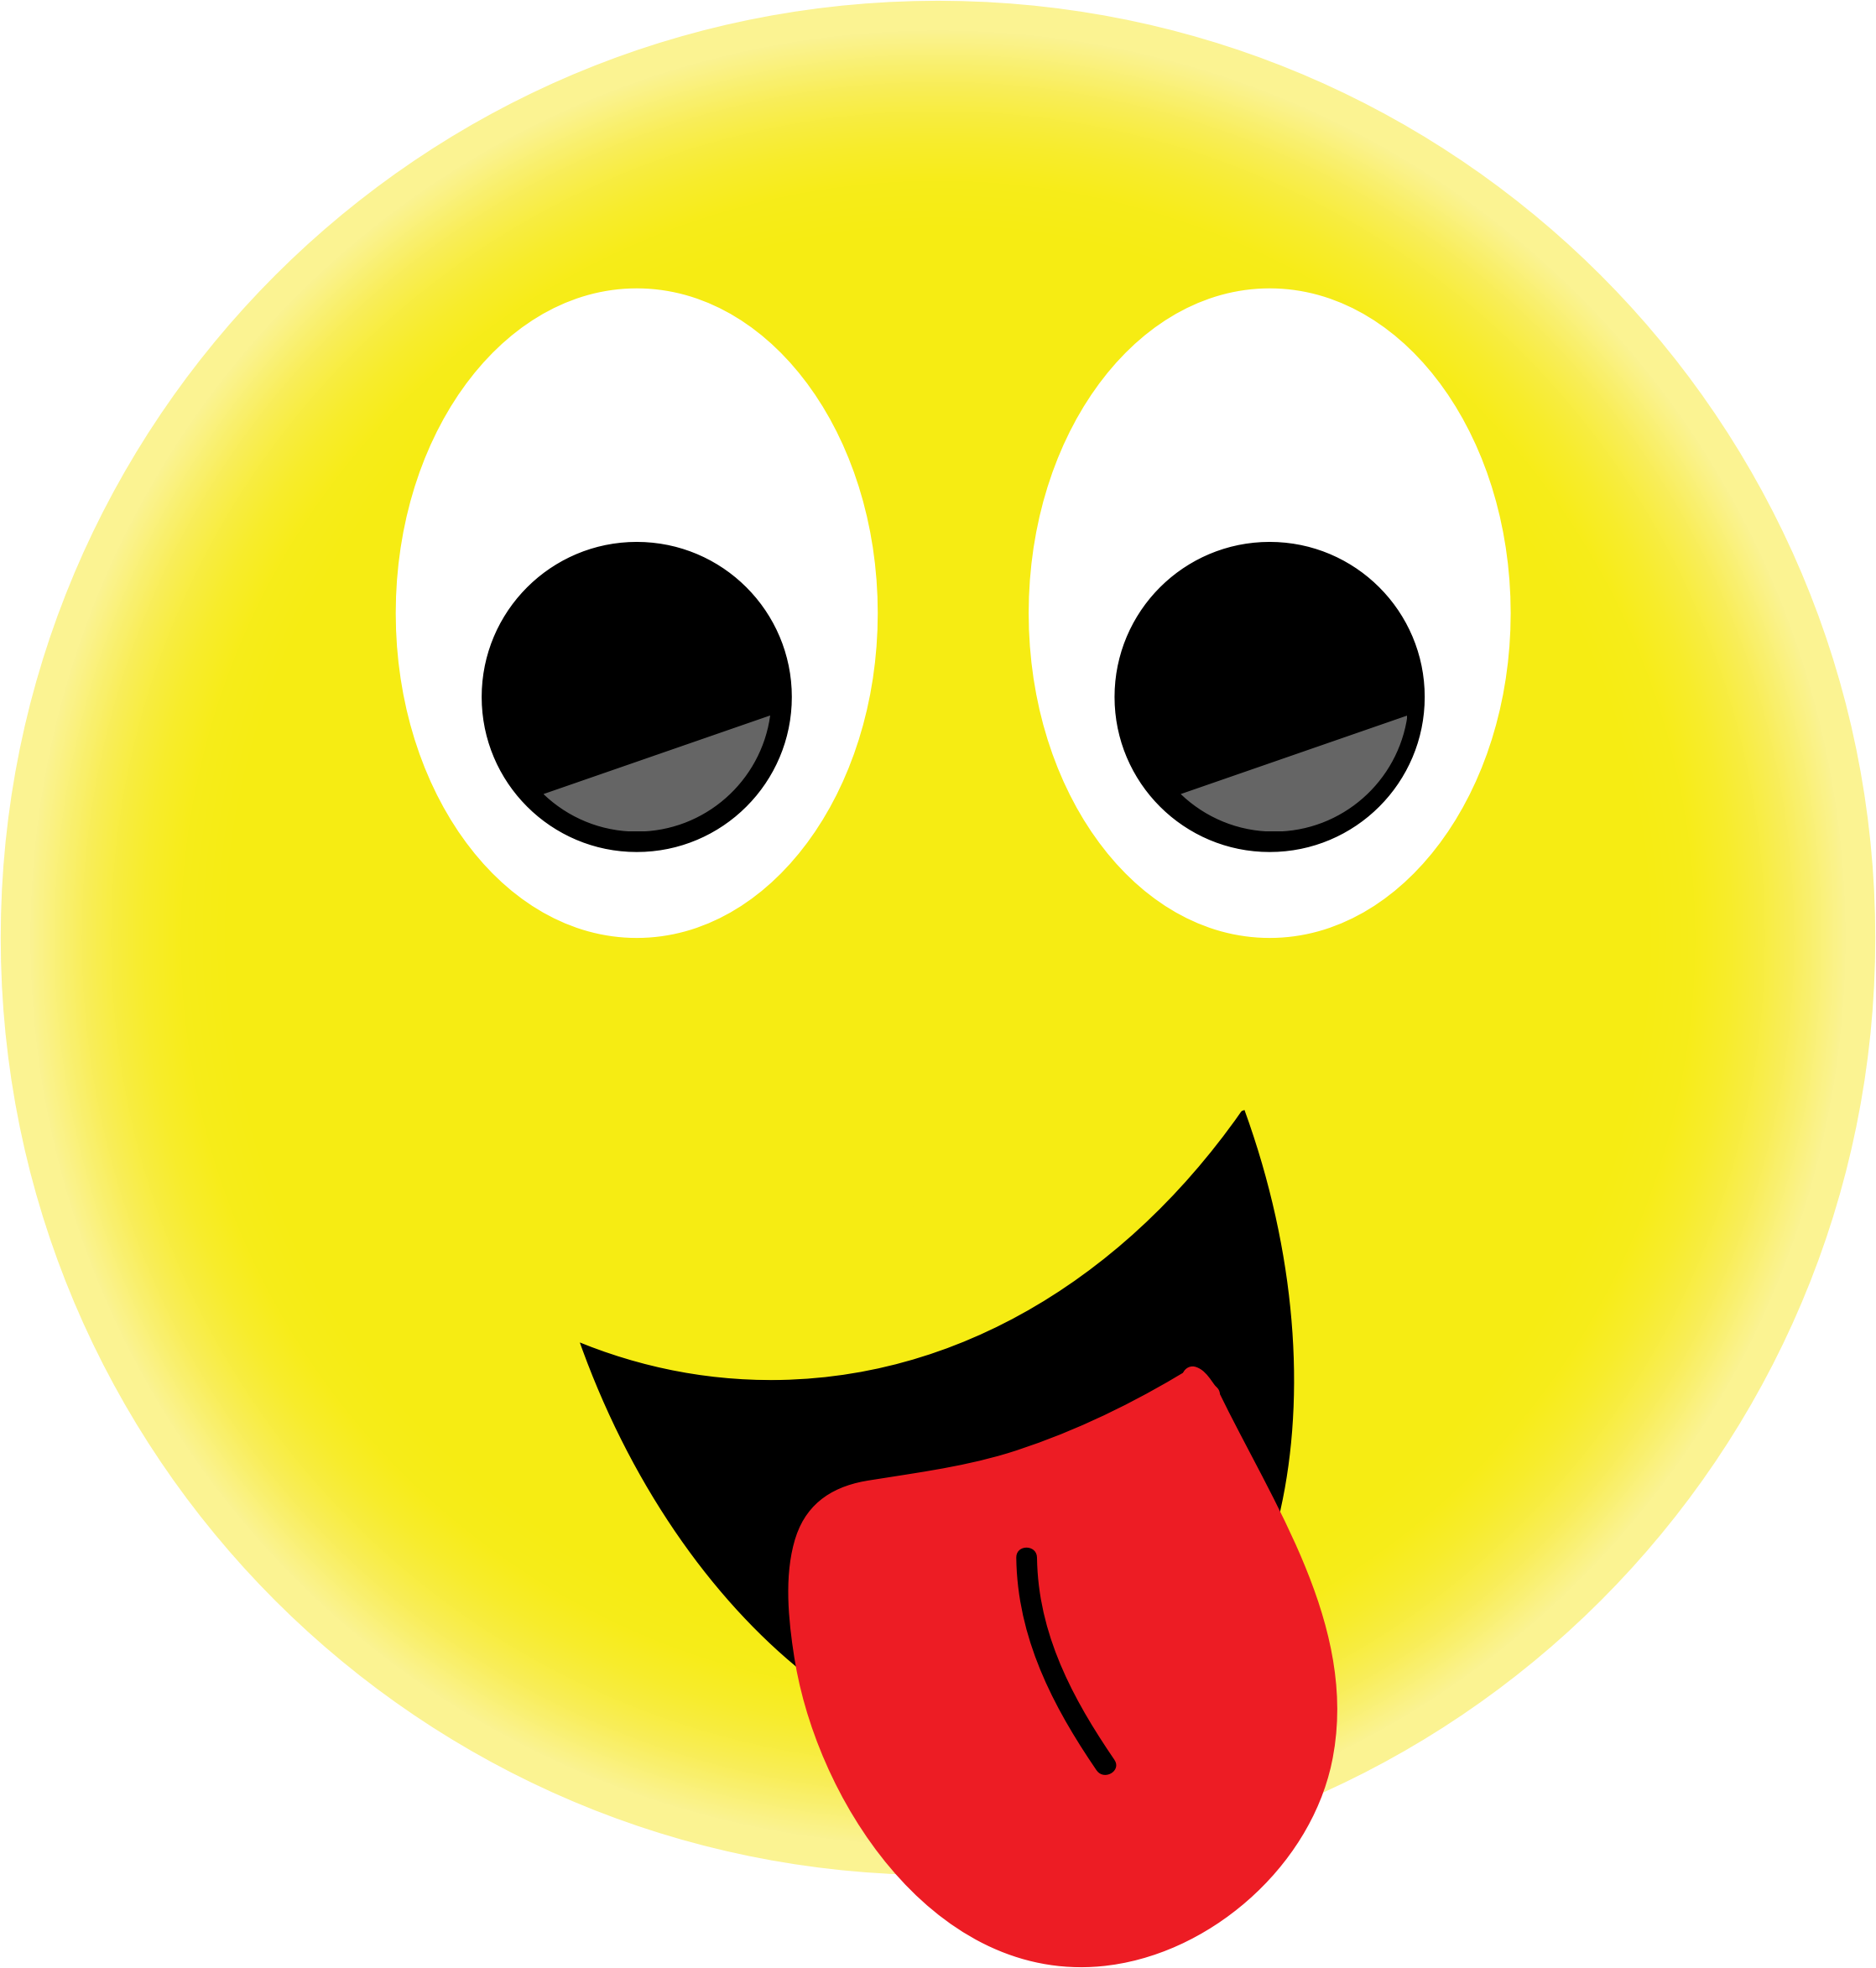 Smiley face tongue out clipart